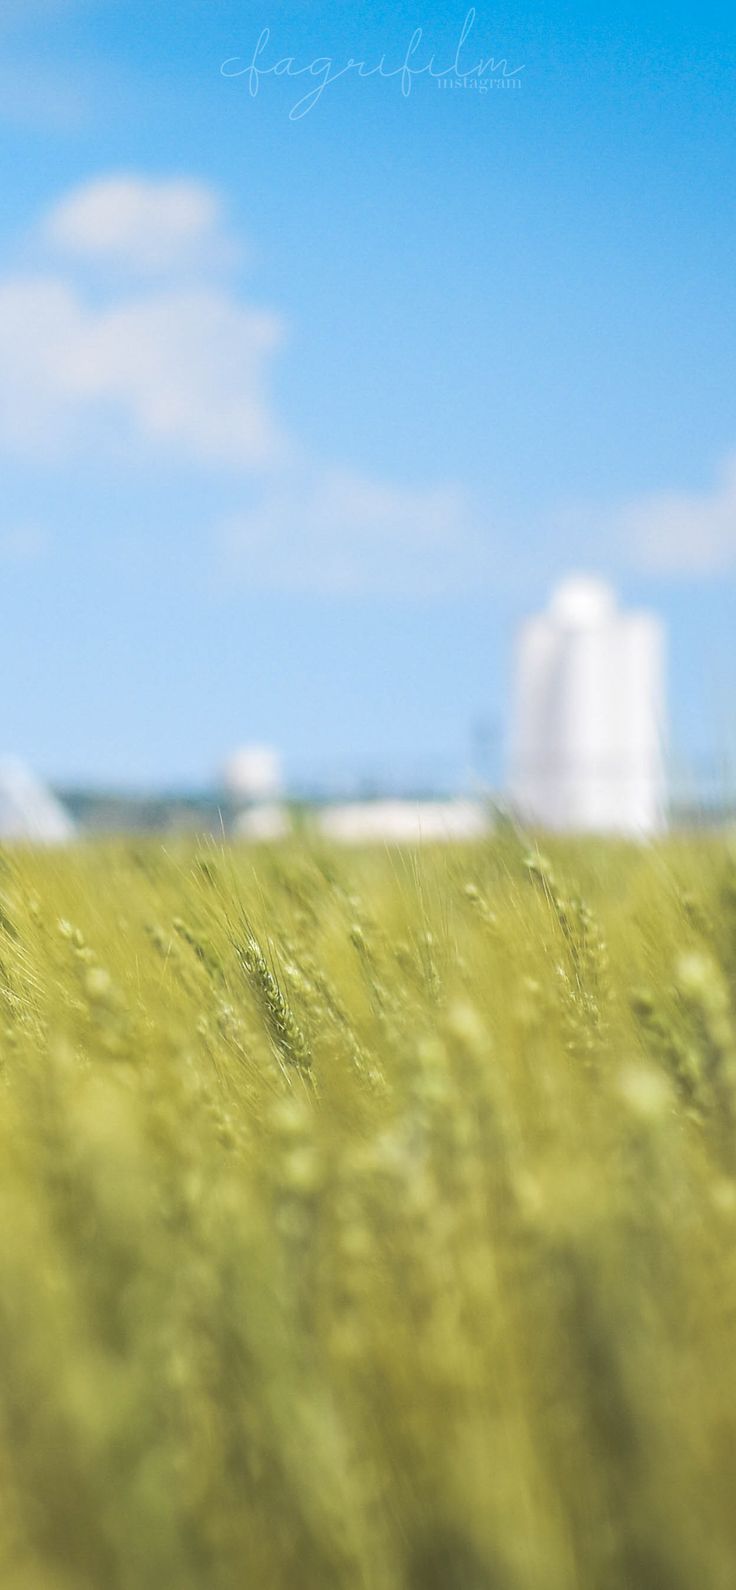 A blurry photo of a field of wheat with a silo in the background. - Farm